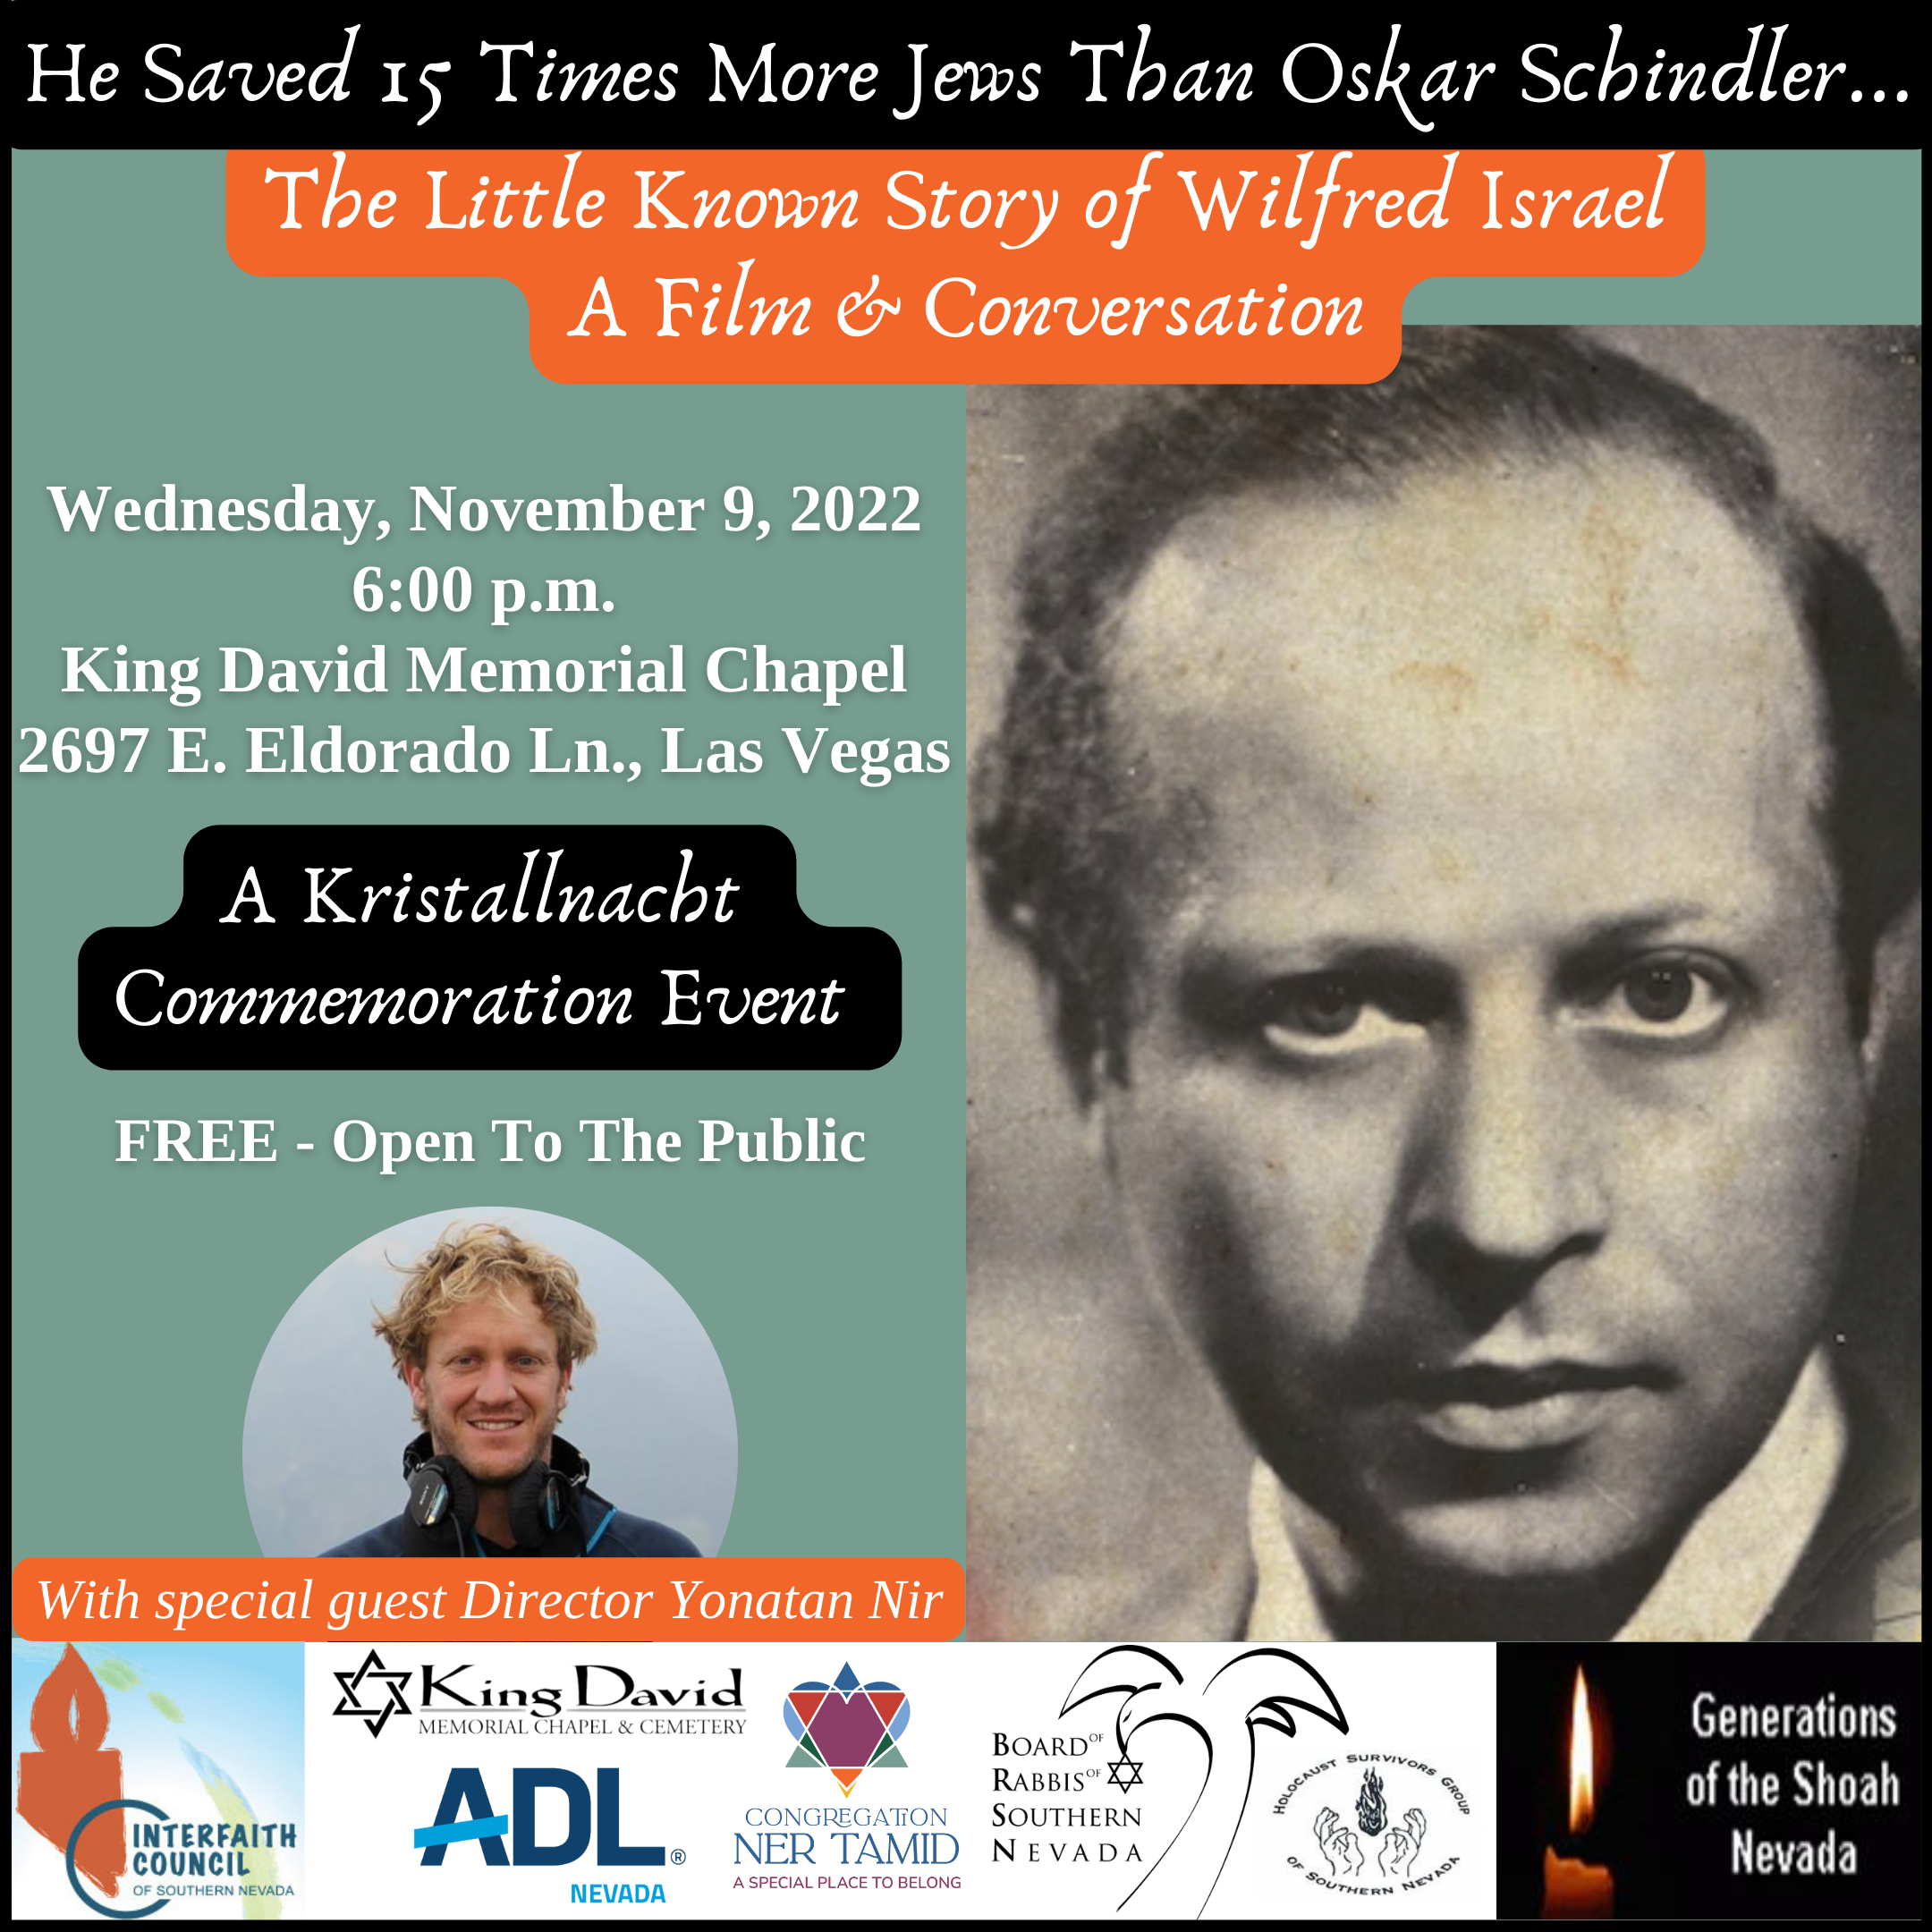 “THE ESSENTIAL LINK: THE STORY OF WILFRID ISRAEL" AT KING DAVID